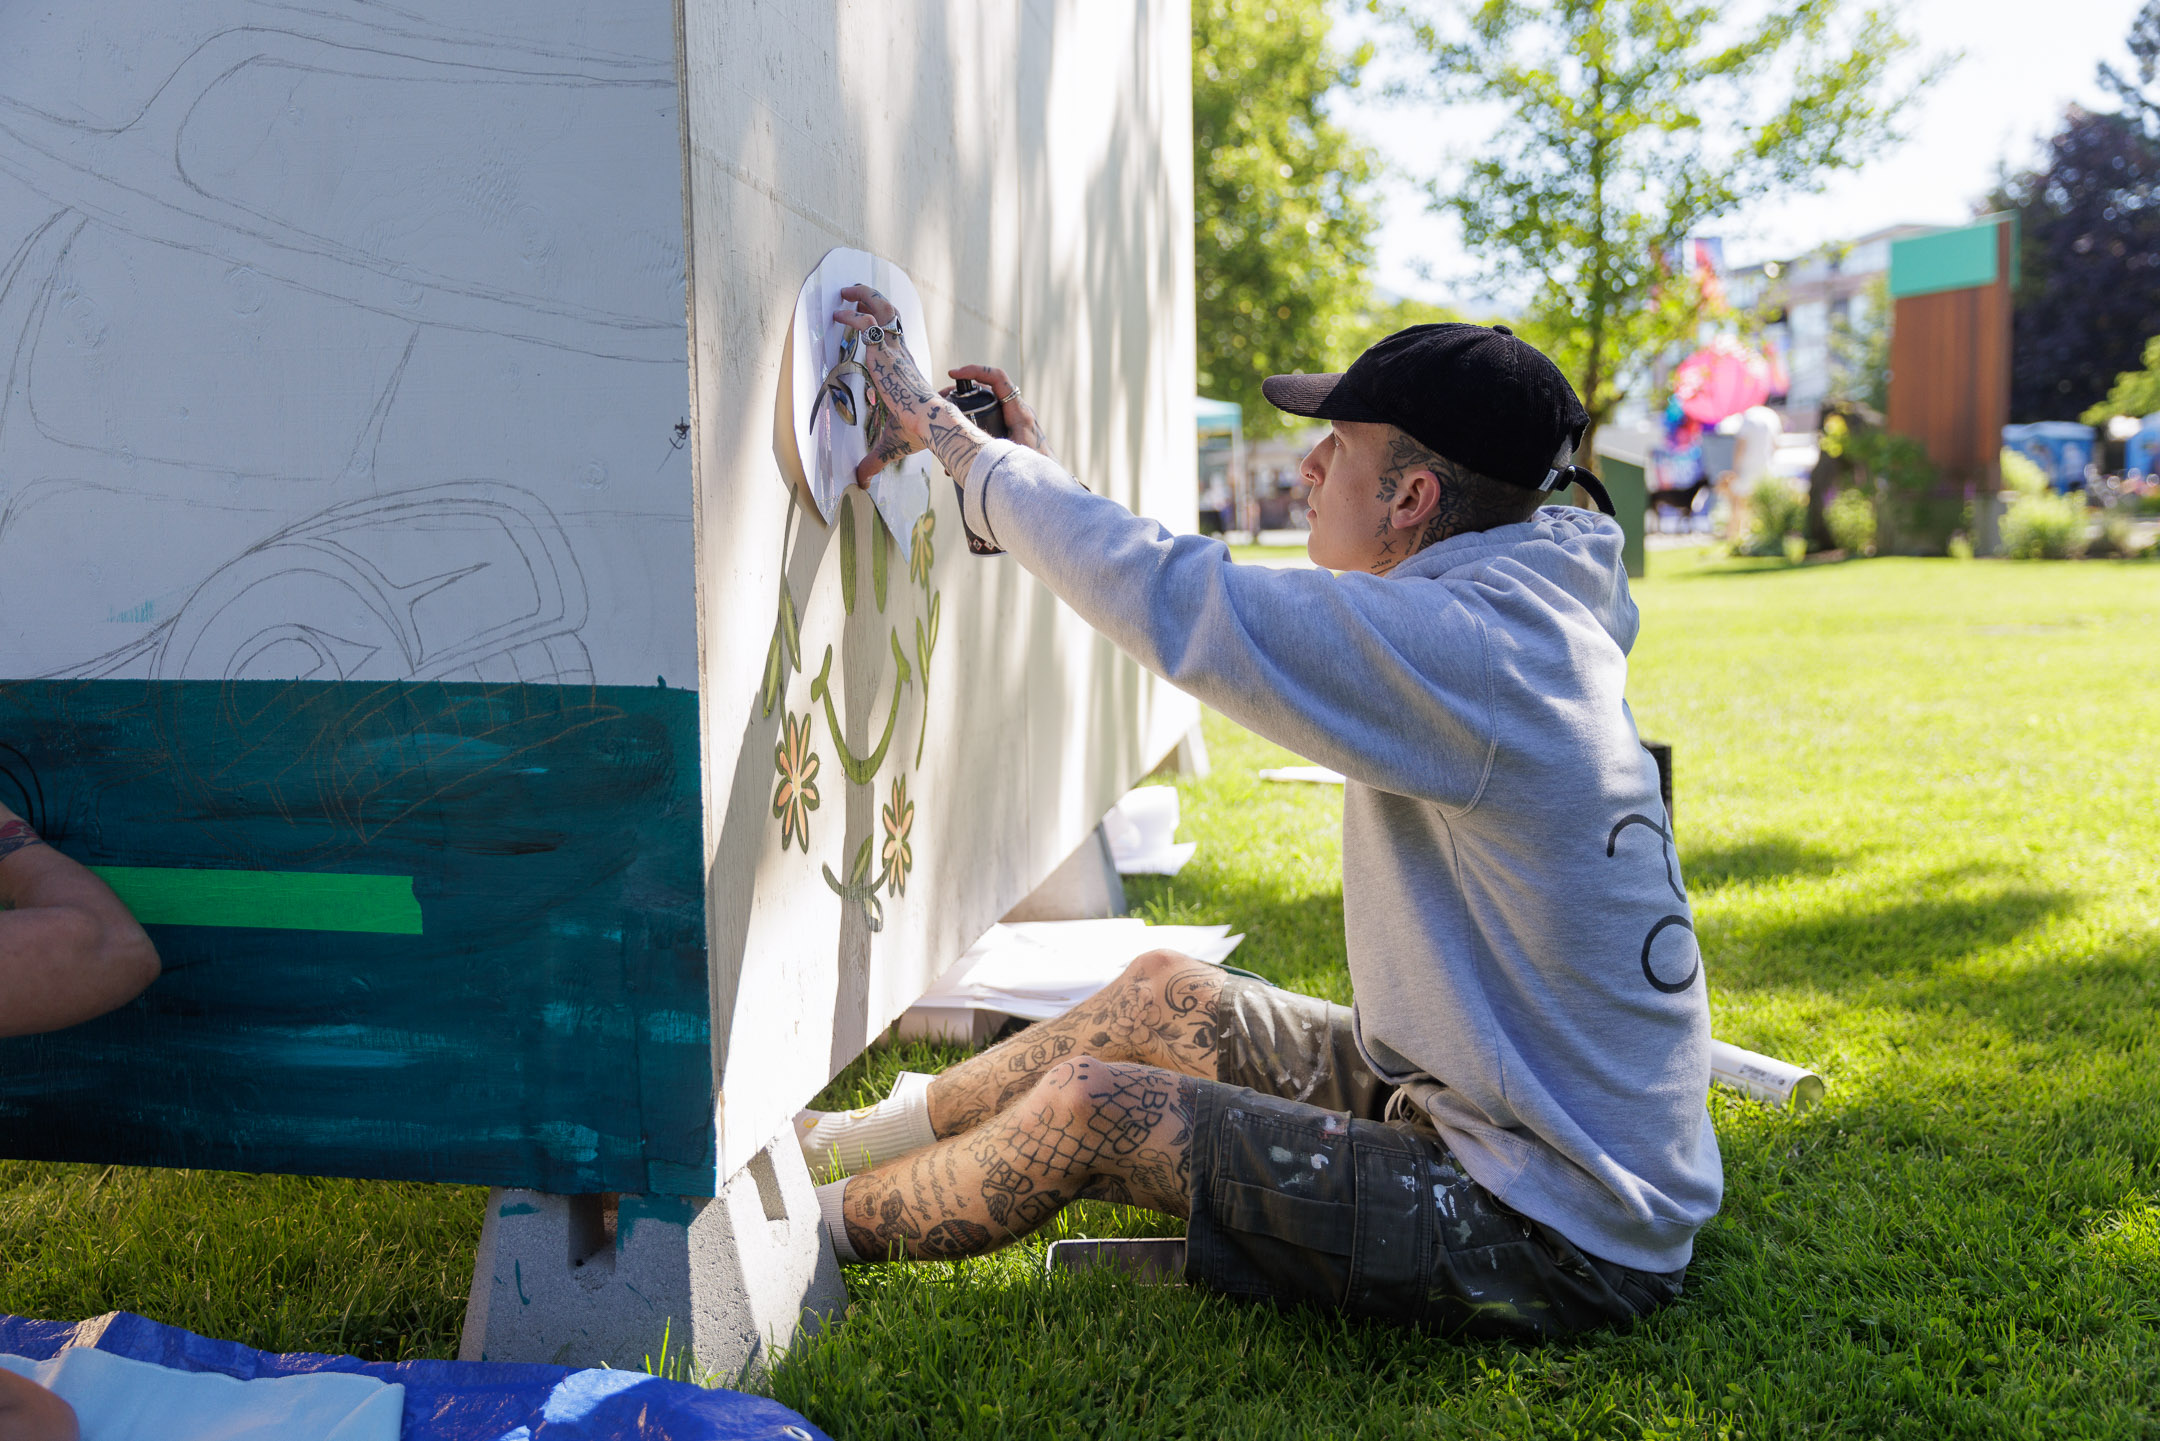 https://www.downtownsquamish.com/wp-content/uploads/2022/09/220625_Squamish-Mural-Festival-Day-2_CTP_0442.jpg